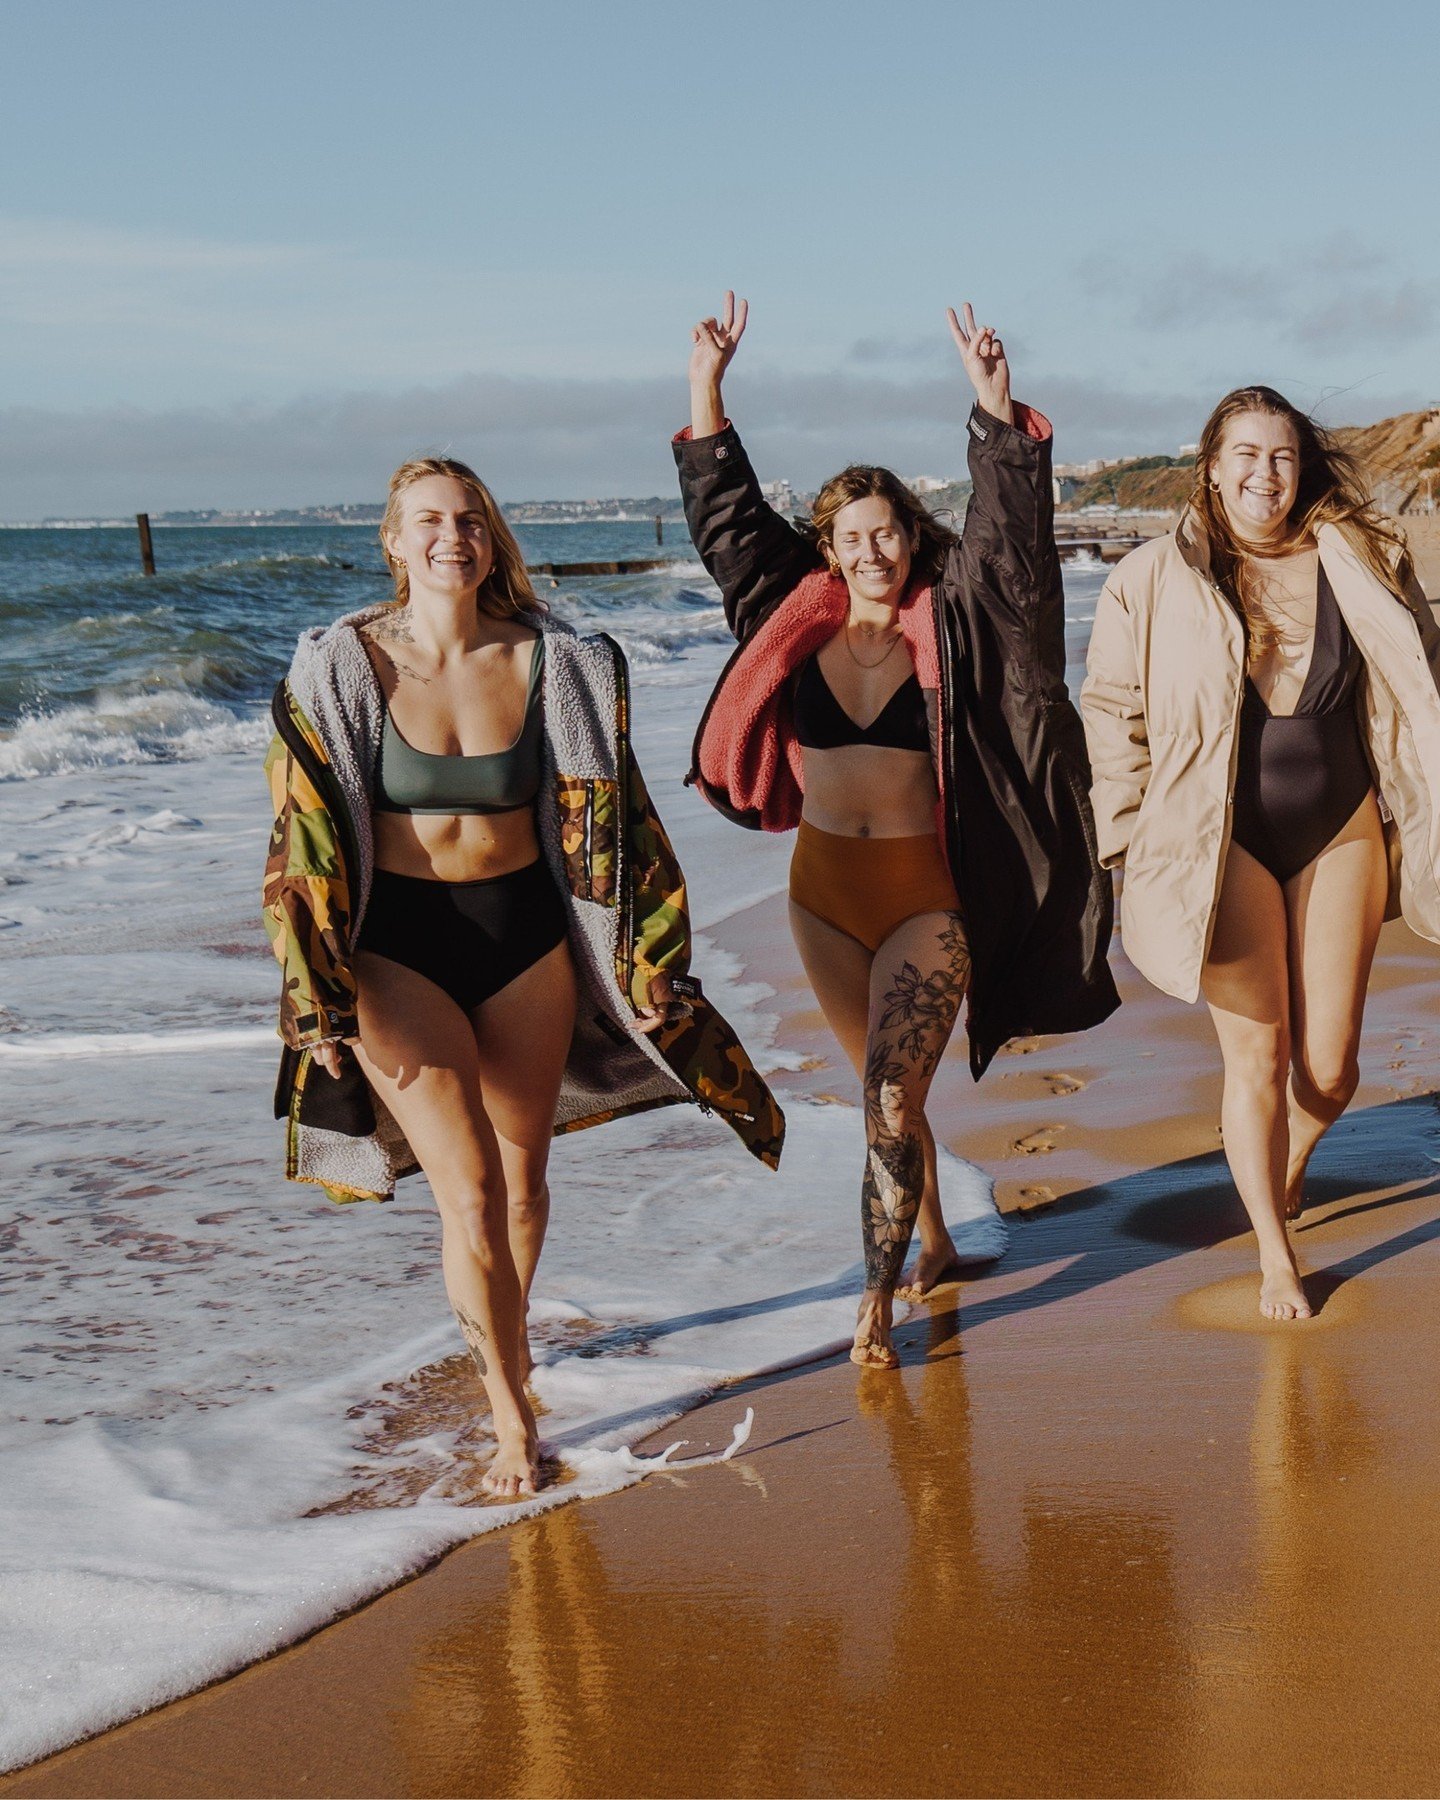 Introducing @atdawnswim, a place for women to find a deeper connection to themselves, each other, and the ocean. Their retreats and events offer up a sanctuary for nourishing the mind, body, and soul. Founders @emhuckstep and @elissacdavies live and 